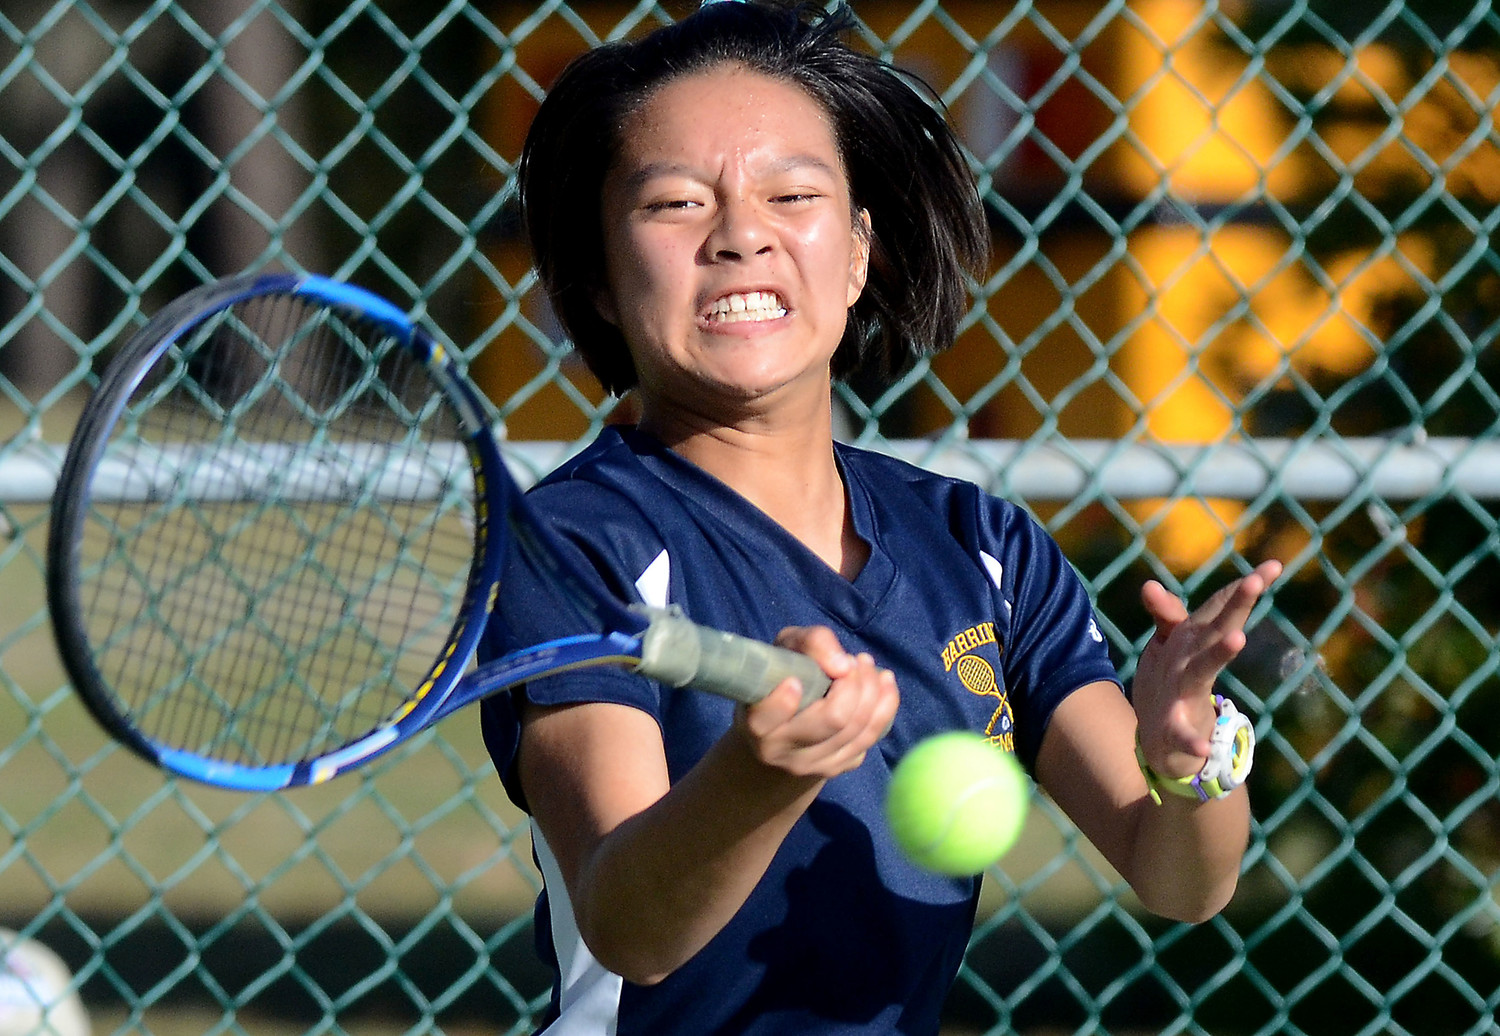 Elizabeth Wang hits a forehand during her match.